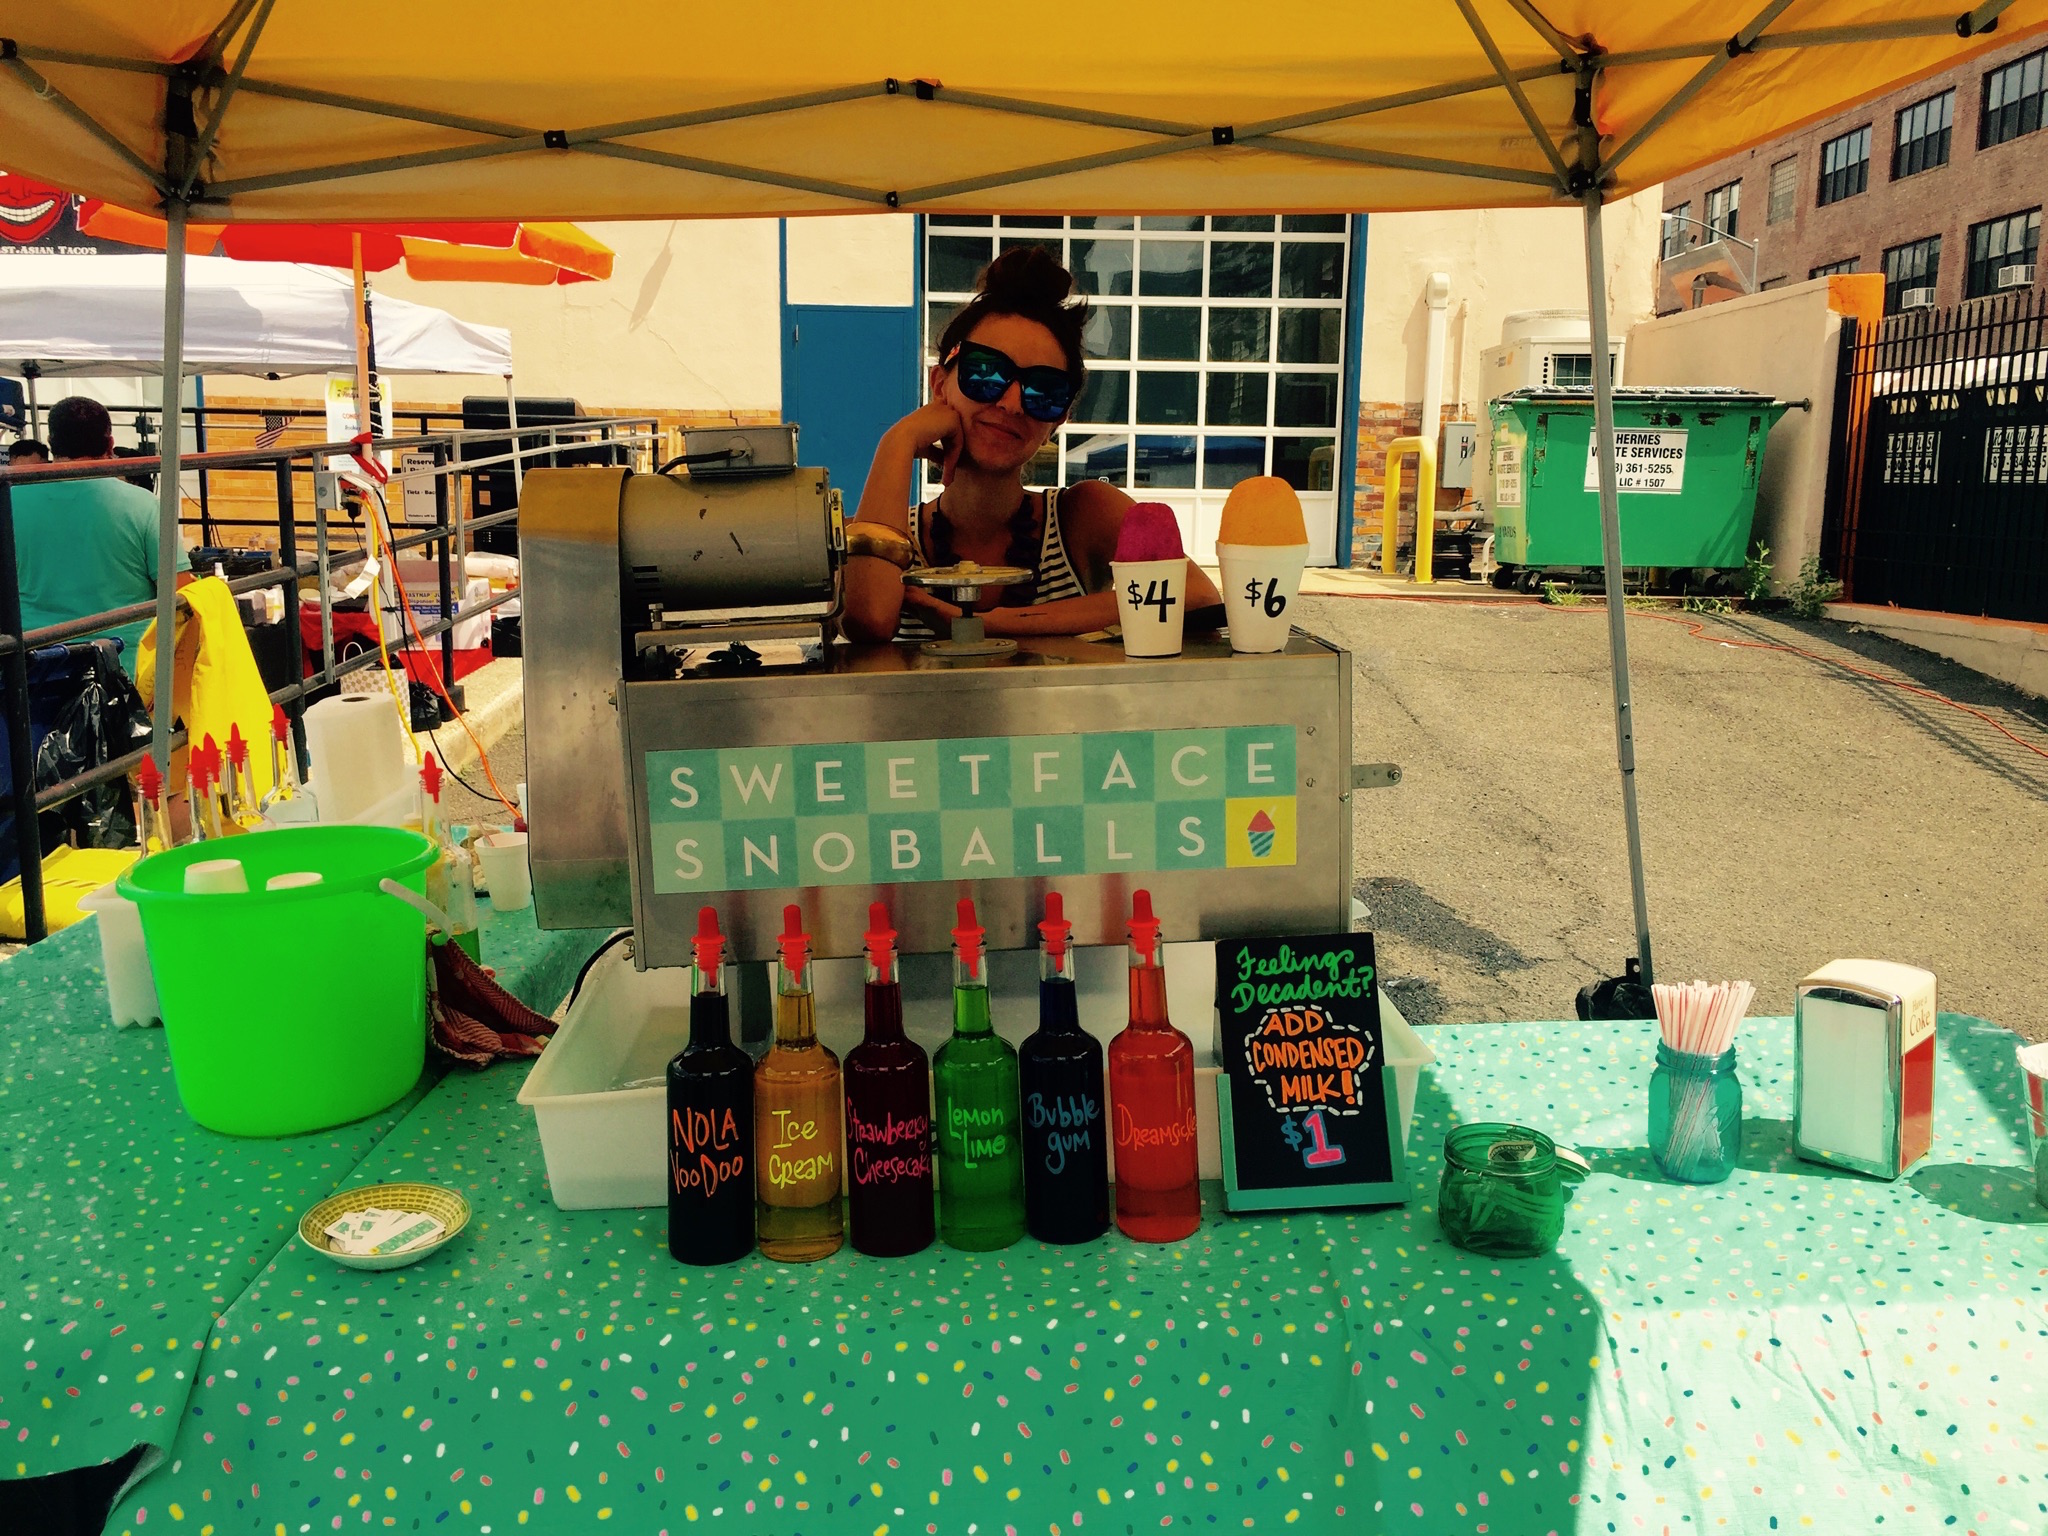 Rebecca Dukert of Sweetface Snoballs selling her snoballs at LIC Flea and Food